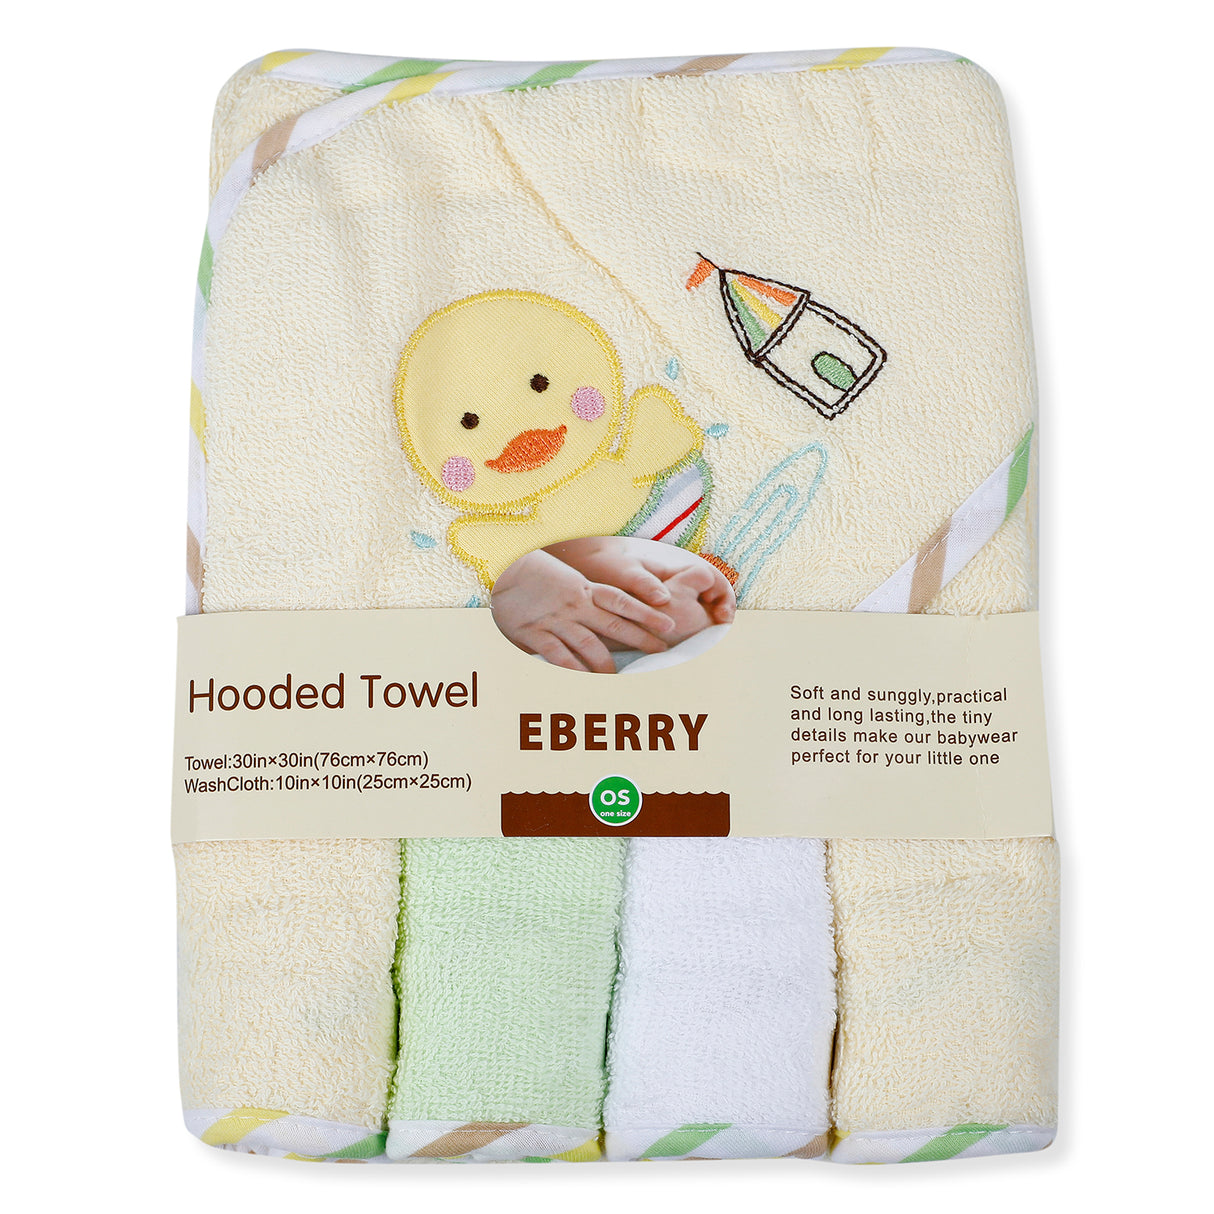 EBERRY Soft And Gentle Towel & Wash Cloth Set